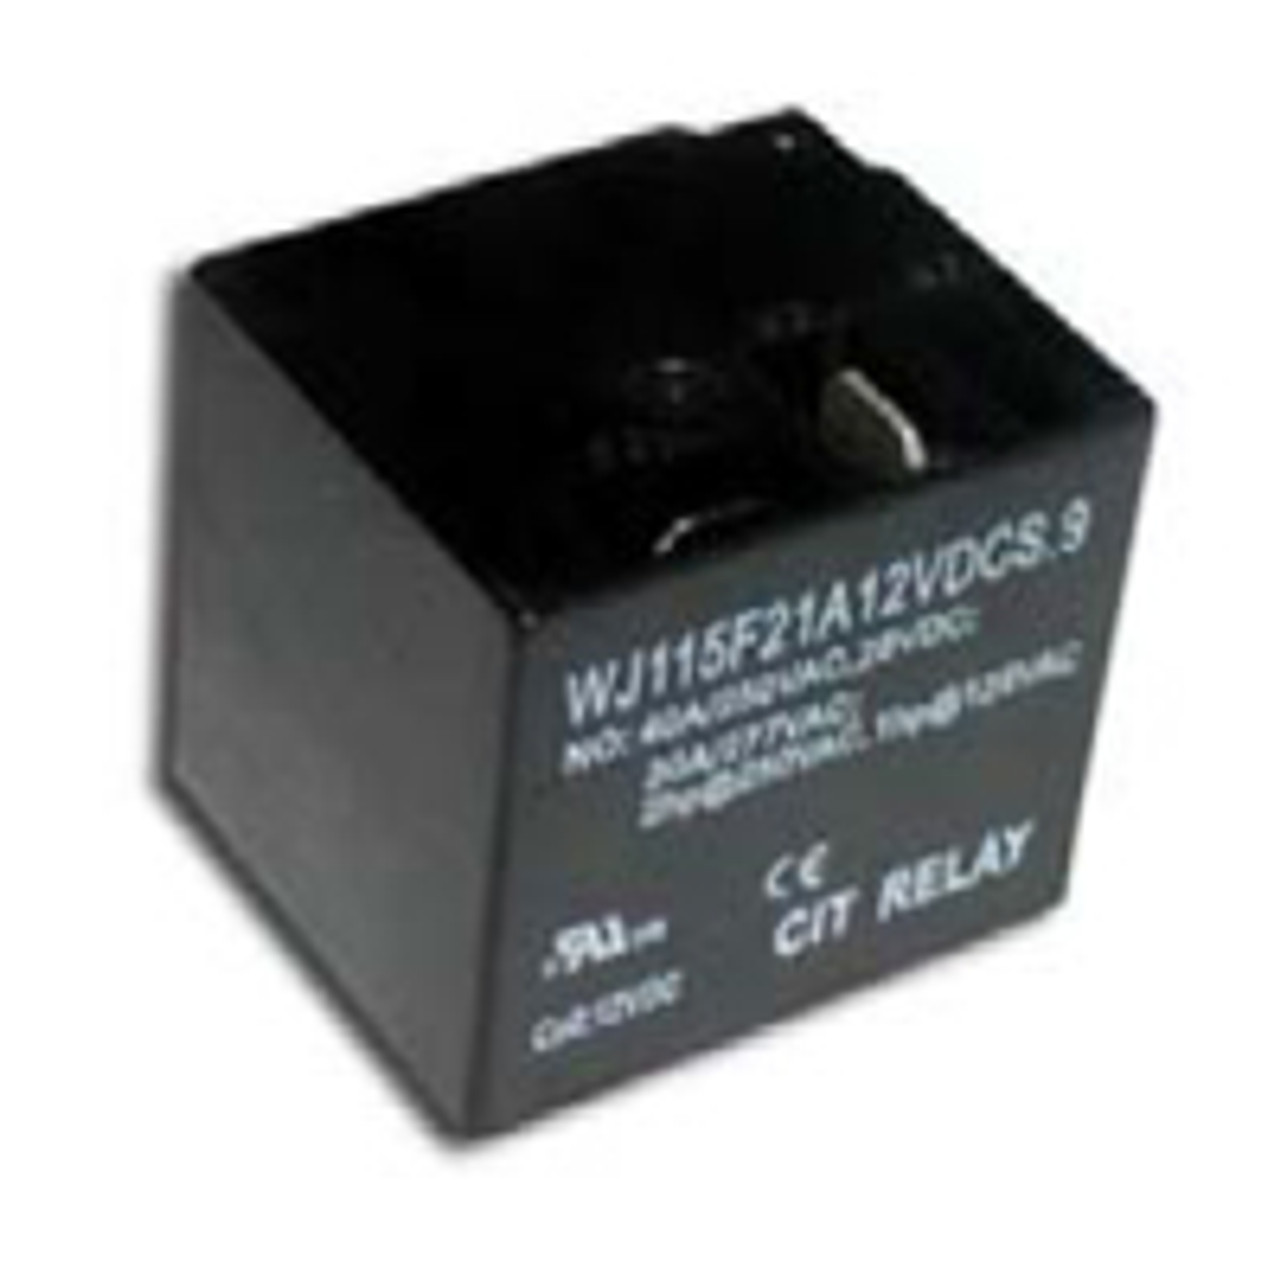 CIT Relay and Switch J115F21A240VACS Power Relays